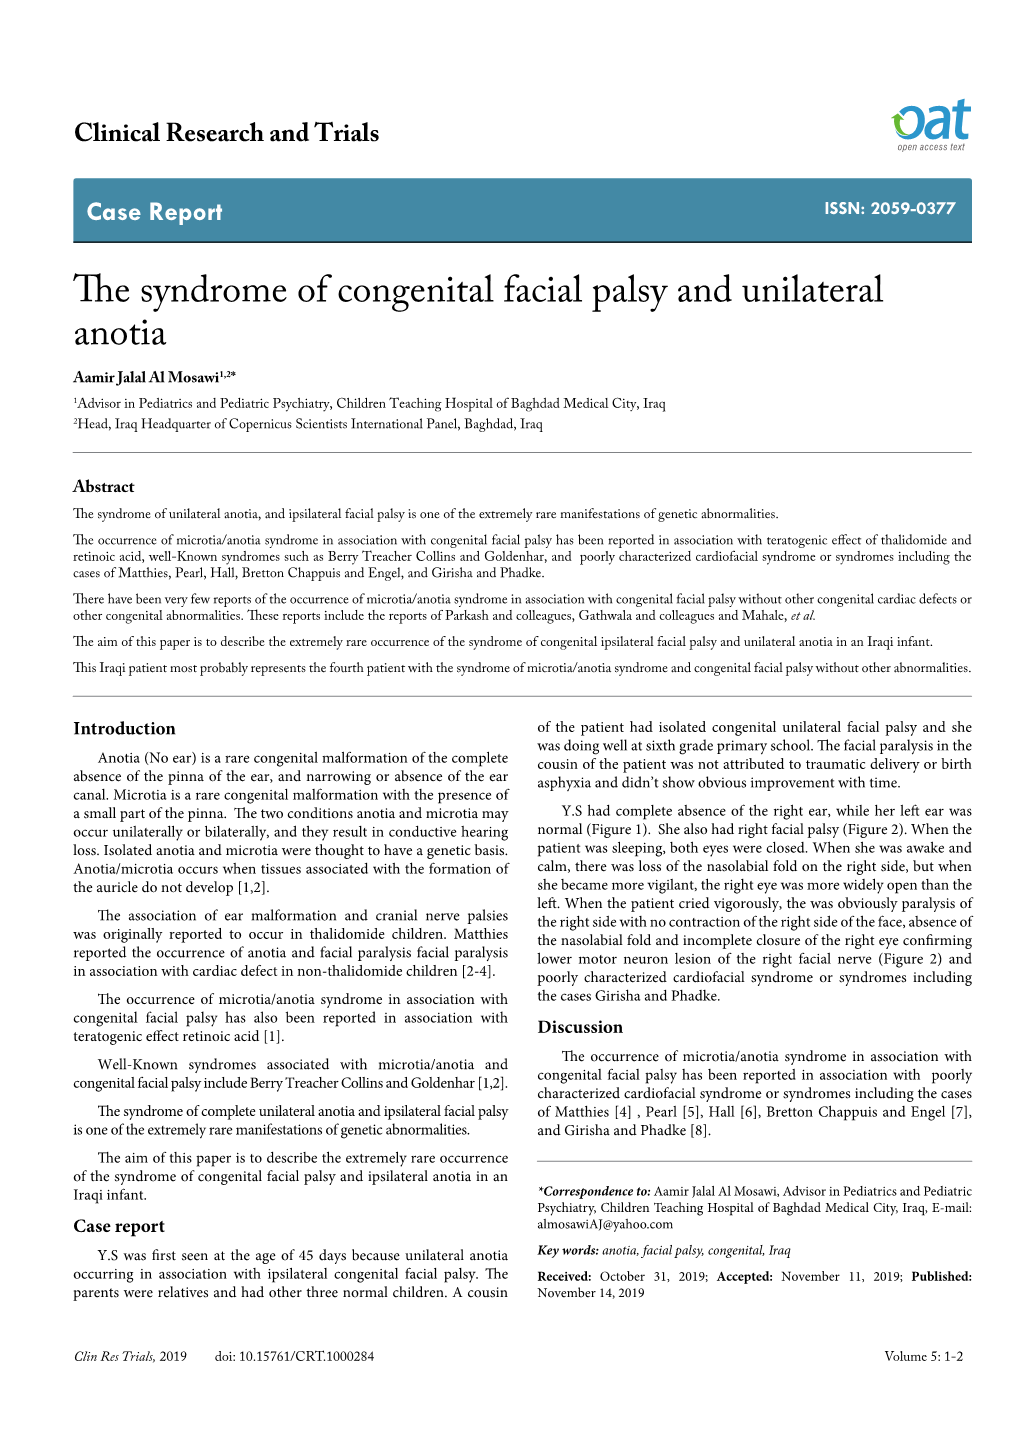 The Syndrome of Congenital Facial Palsy and Unilateral Anotia